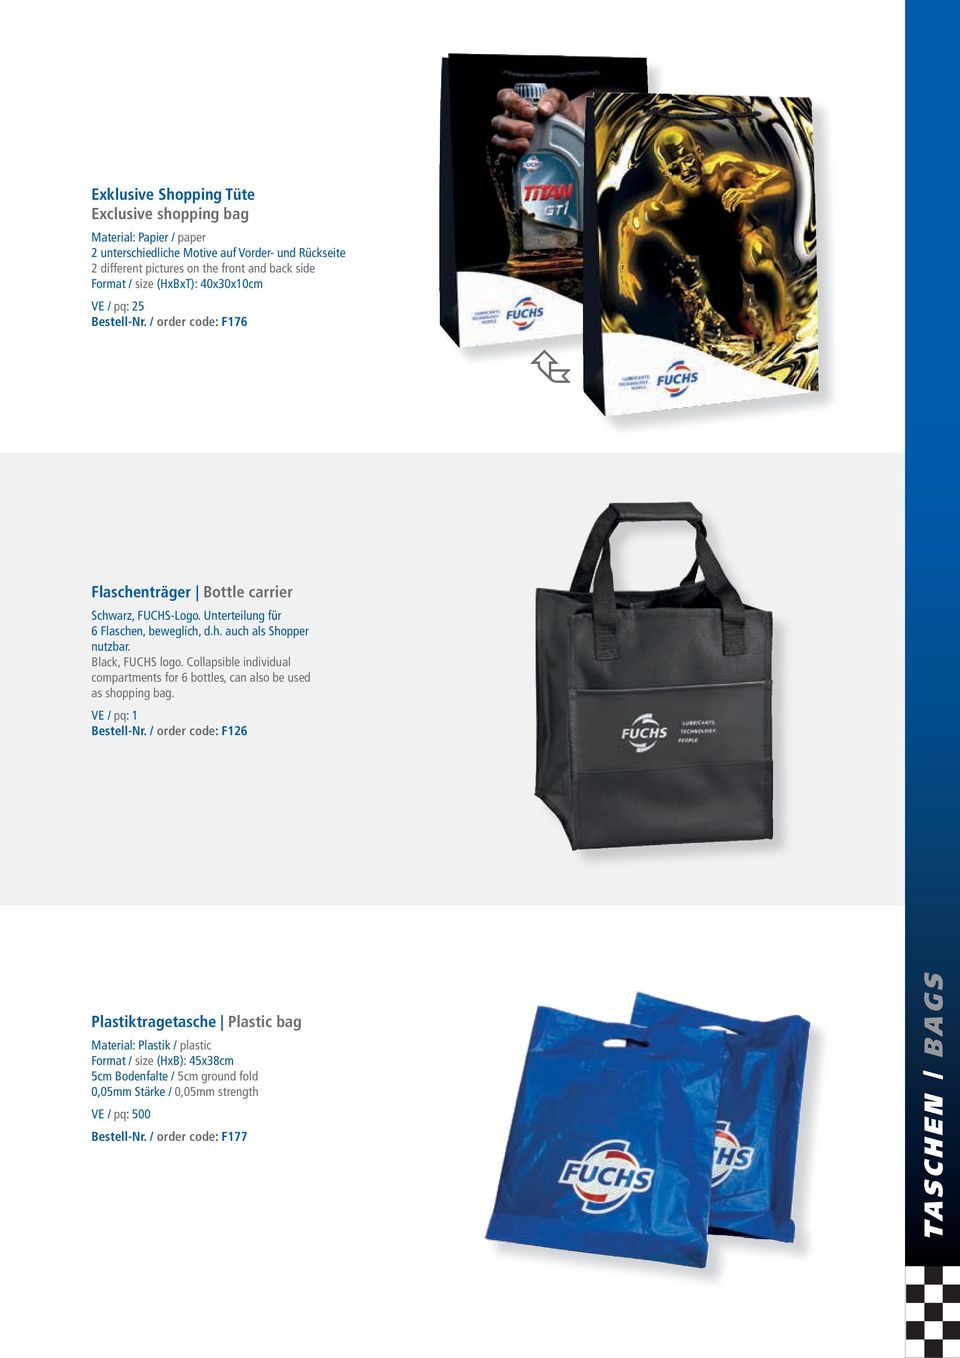 Black, FUCHS logo. Collapsible individual compartments for 6 bottles, can also be used as shopping bag. Bestell-Nr.